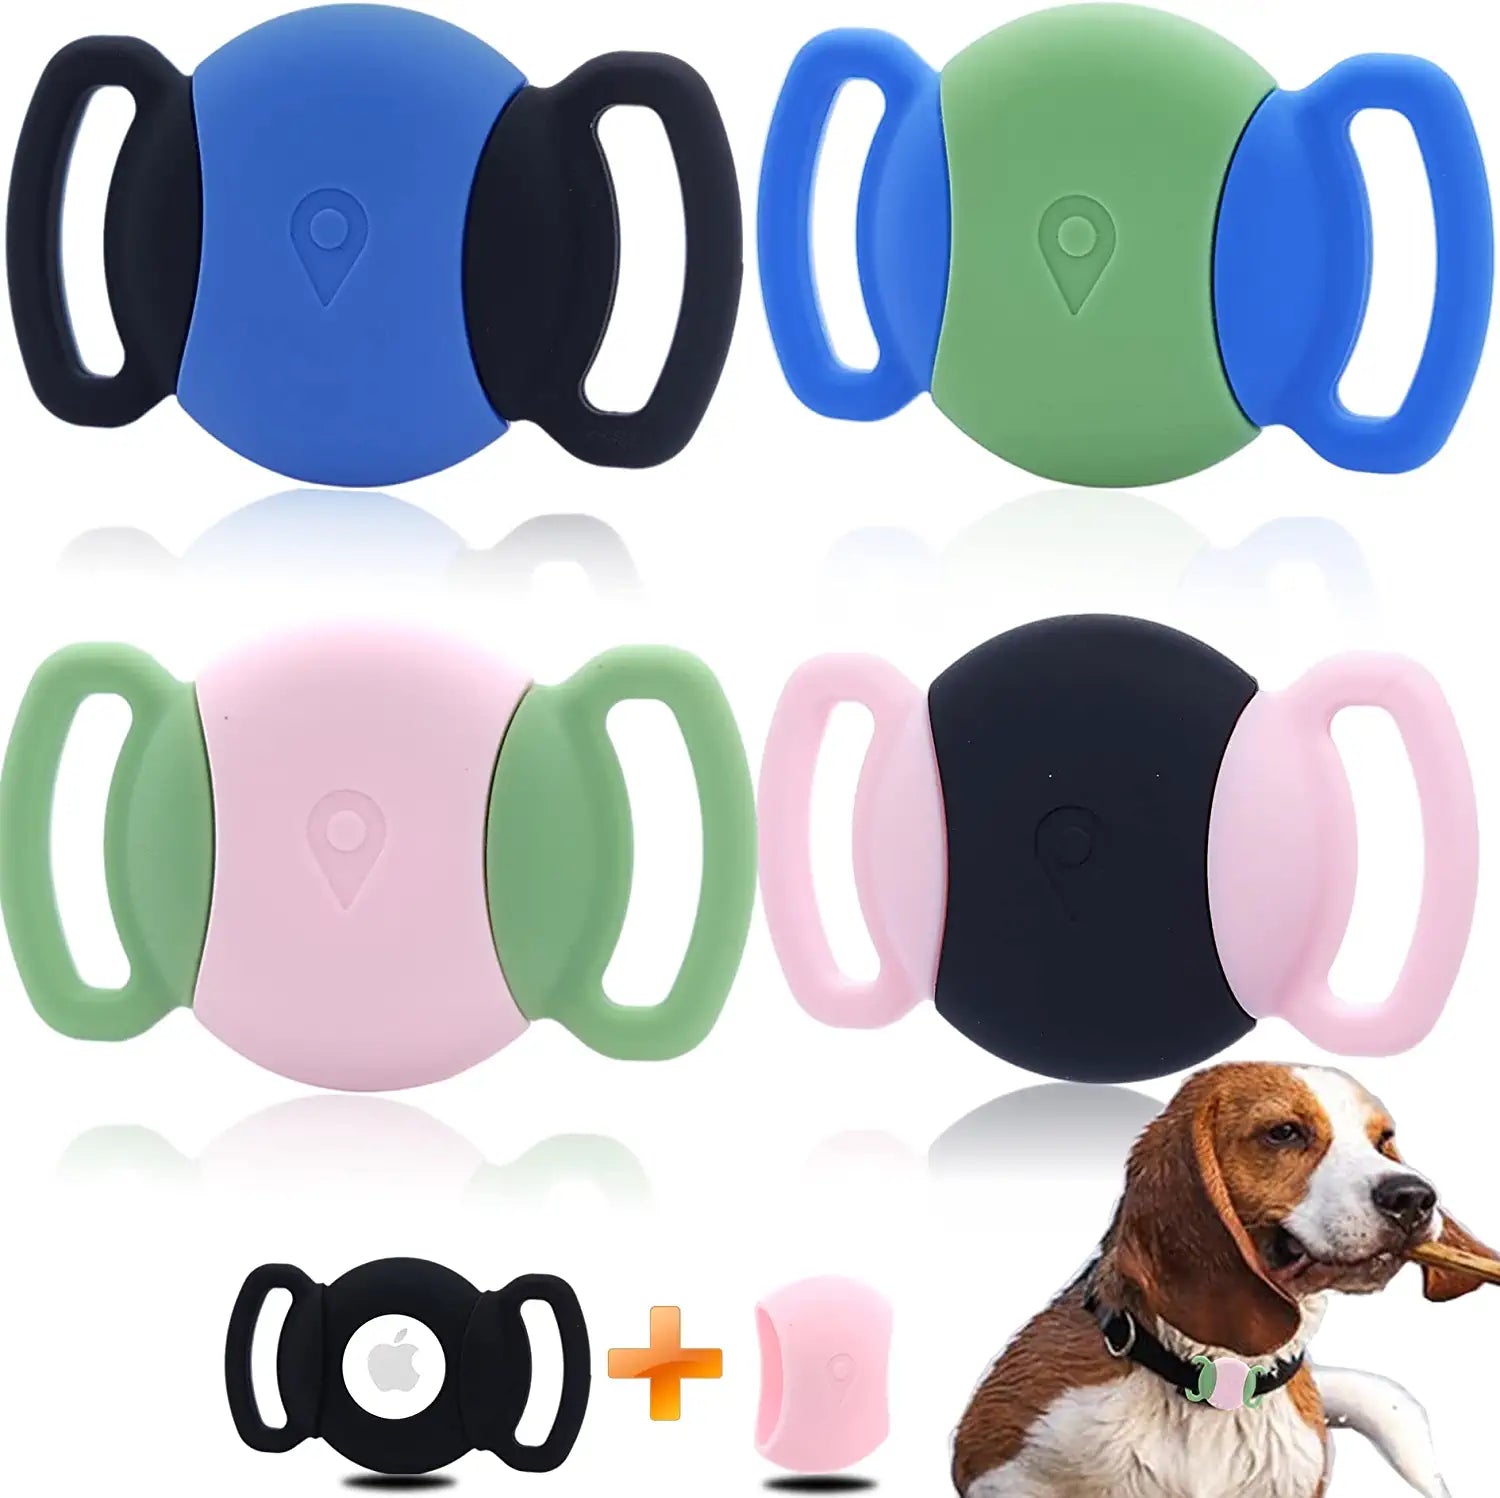 Waterproof Case for Apple Airtags for Dog Collar, Silicone Accessories for GPS Tracker,Slim Dropper for Pet Finder Tag,Secure Lightweight Holder for Smart Airtag,4 Packs (Black,Pink,Green,Blue)